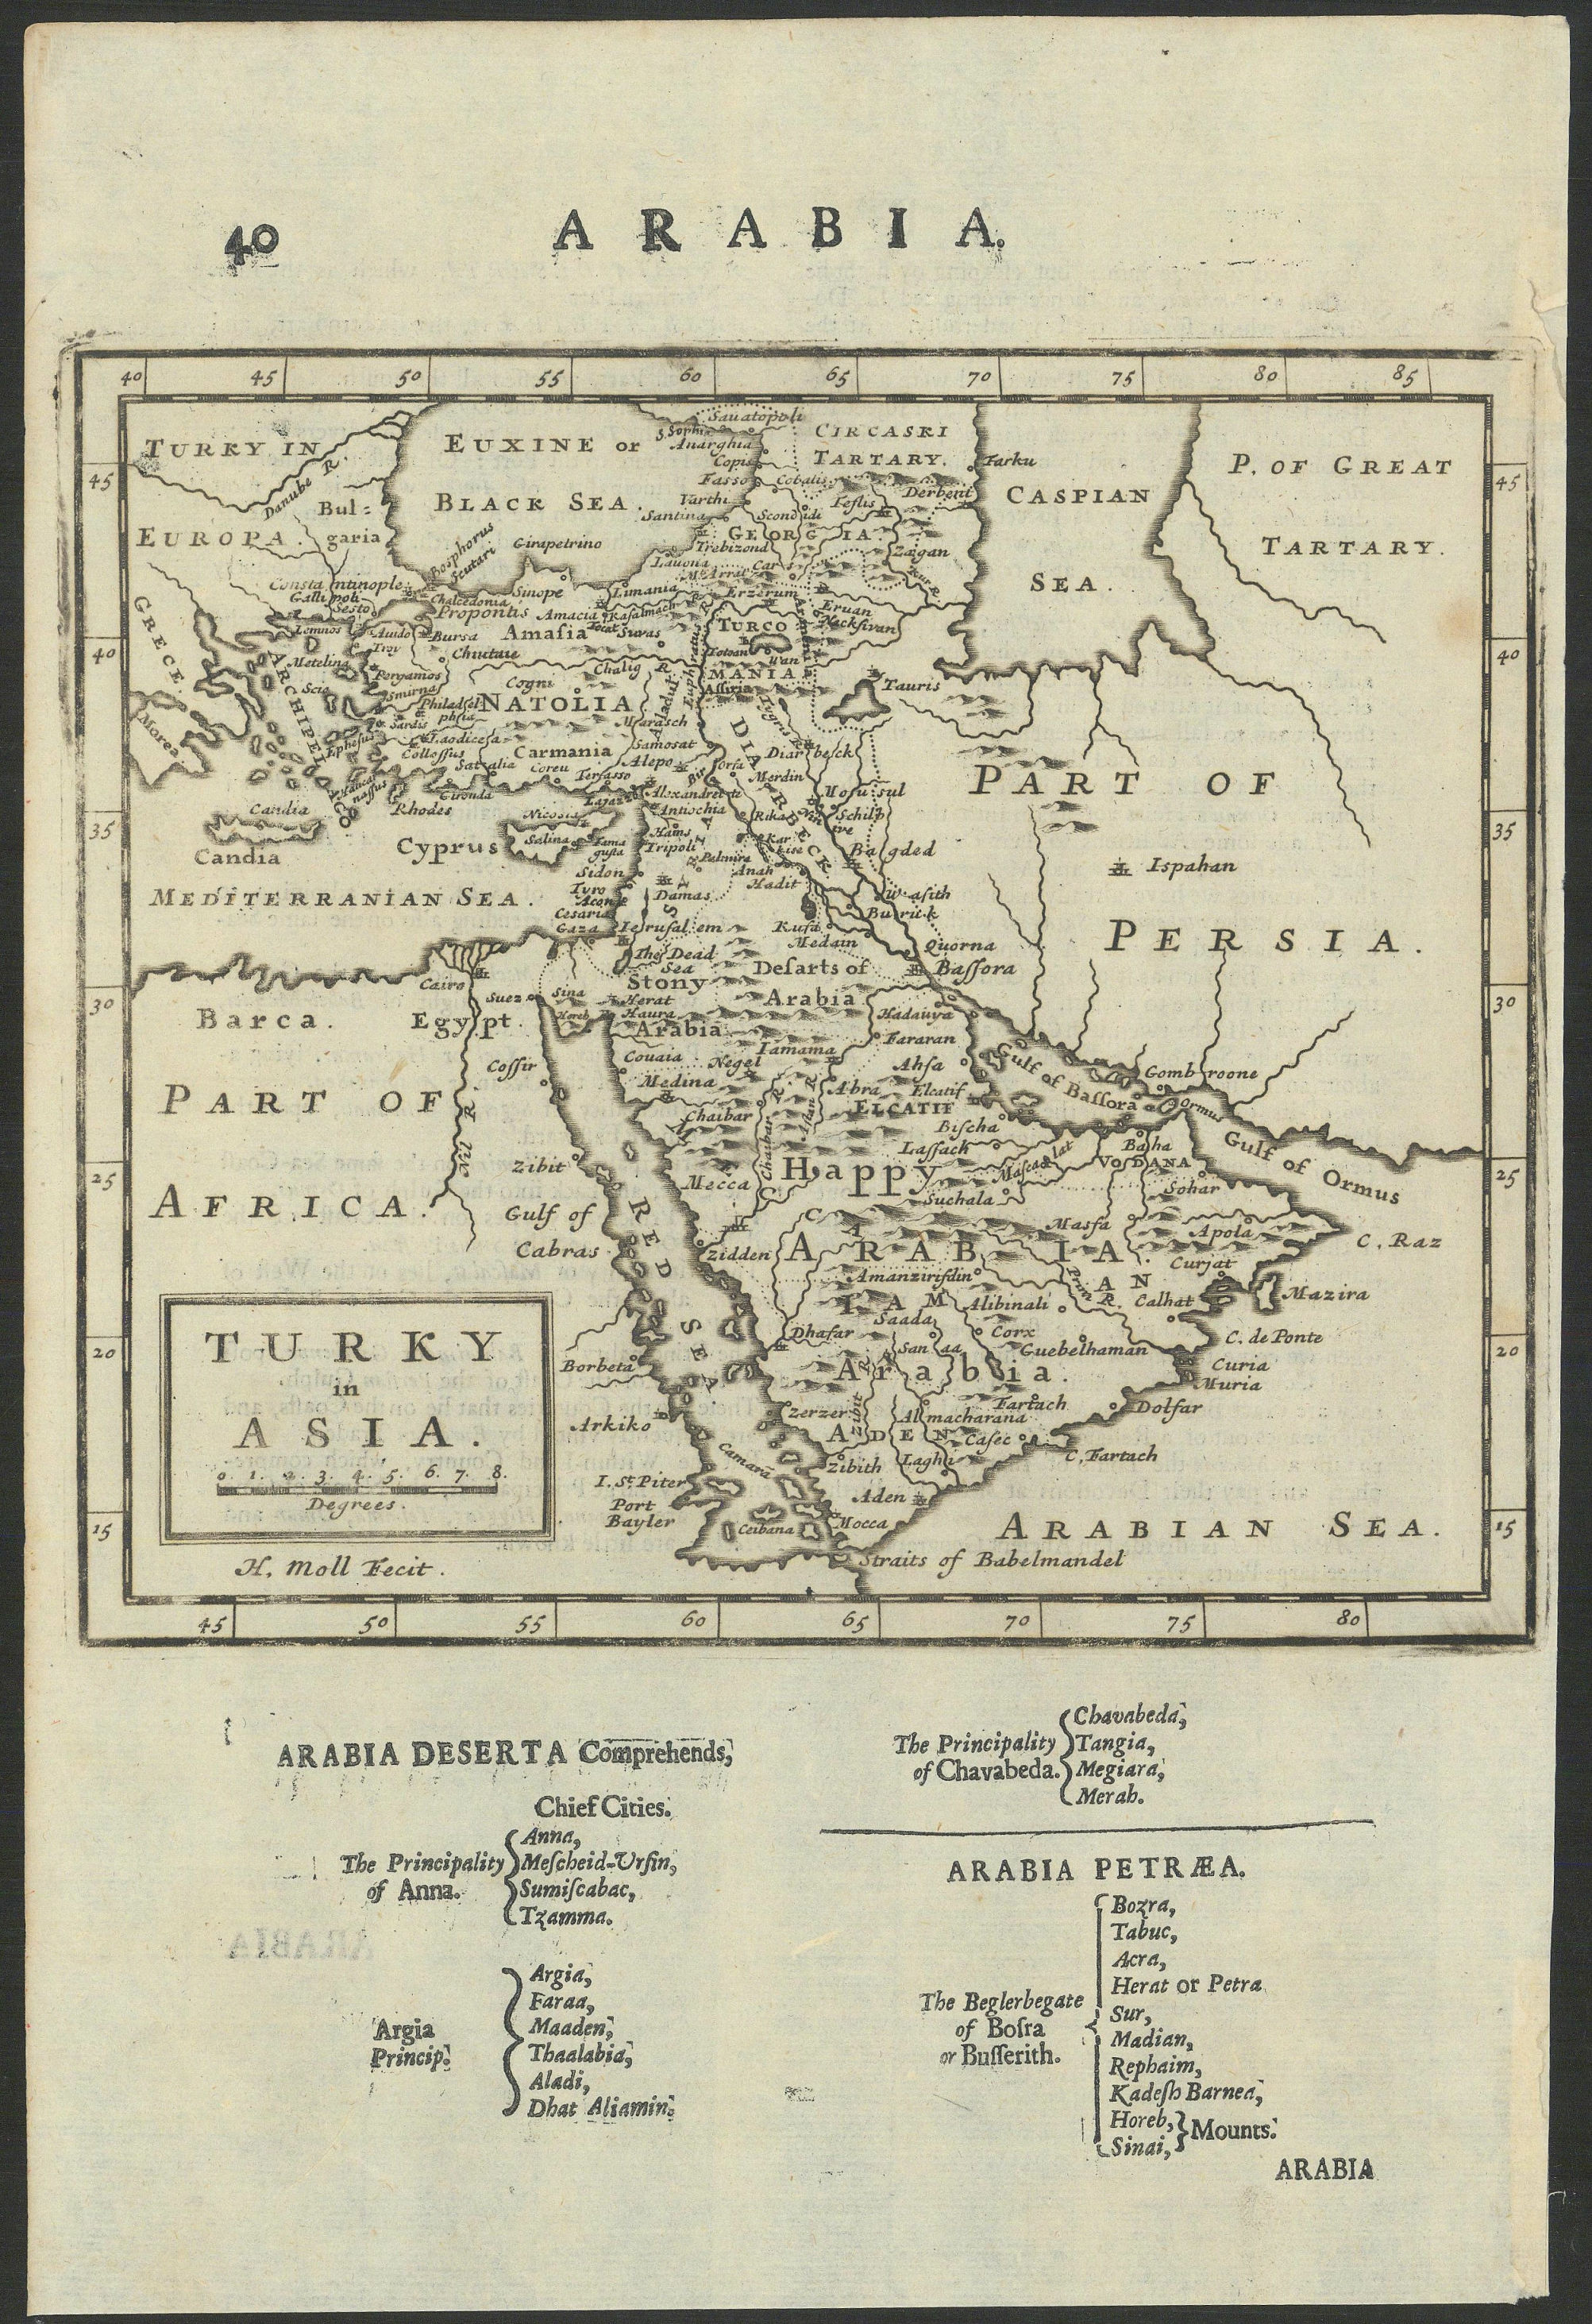 Associate Product Turky [Turkey] in Asia by Herman Moll. Middle East & Arabia 1709 old map